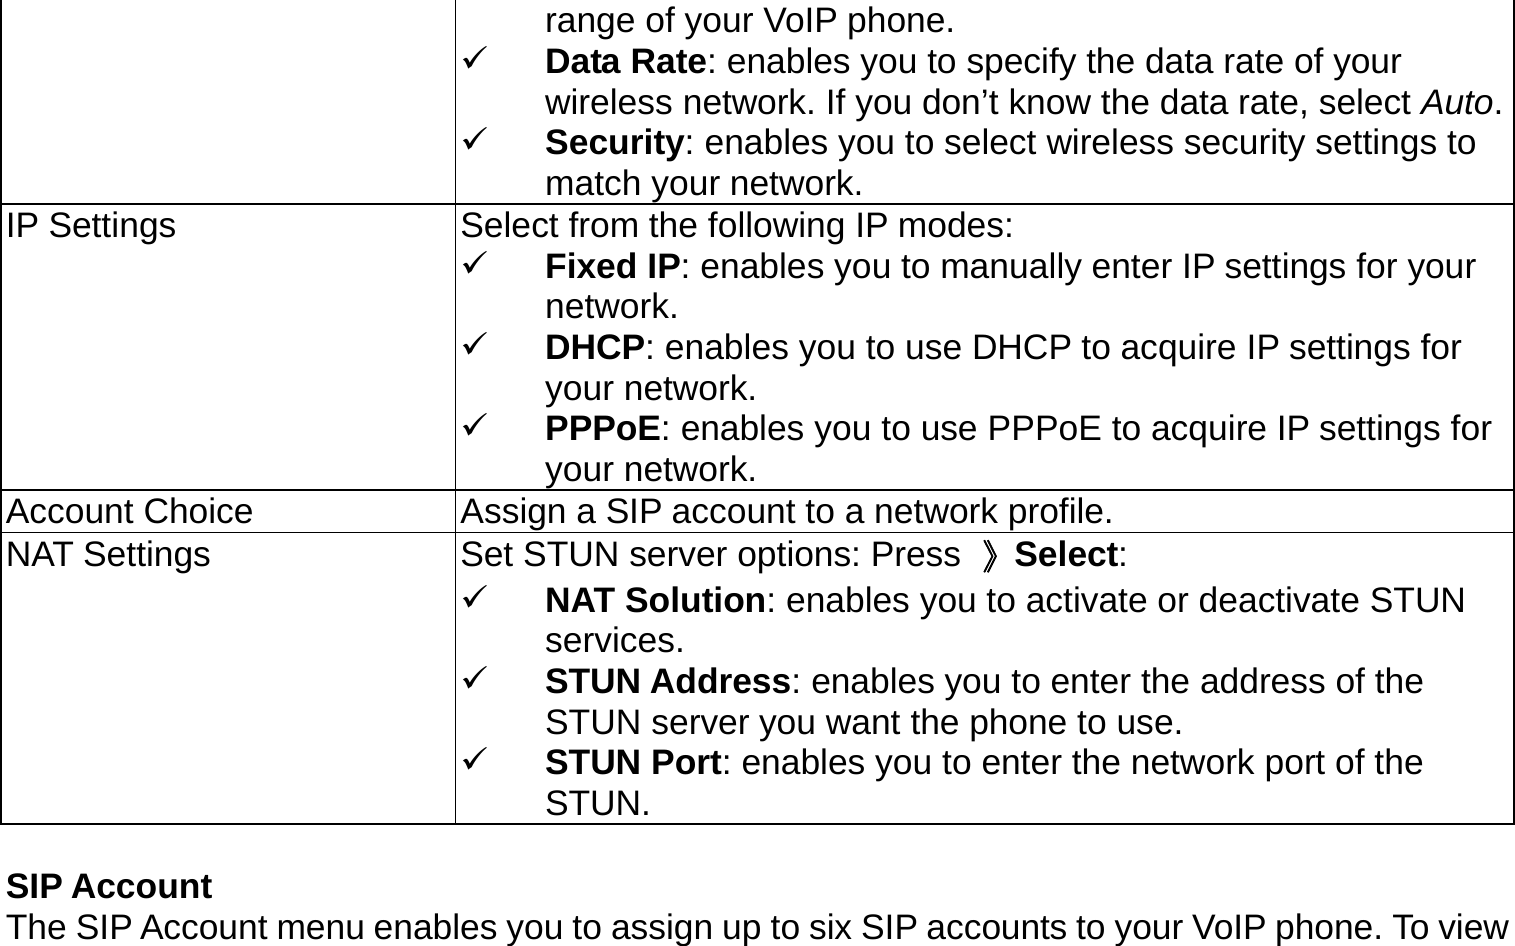 range of your VoIP phone.   Data Rate: enables you to specify the data rate of your wireless network. If you don’t know the data rate, select Auto.  Security: enables you to select wireless security settings to match your network. IP Settings  Select from the following IP modes:   Fixed IP: enables you to manually enter IP settings for your network.   DHCP: enables you to use DHCP to acquire IP settings for your network.   PPPoE: enables you to use PPPoE to acquire IP settings for your network. Account Choice  Assign a SIP account to a network profile. NAT Settings  Set STUN server options: Press  》Select:   NAT Solution: enables you to activate or deactivate STUN services.   STUN Address: enables you to enter the address of the STUN server you want the phone to use.   STUN Port: enables you to enter the network port of the STUN.  SIP Account The SIP Account menu enables you to assign up to six SIP accounts to your VoIP phone. To view 